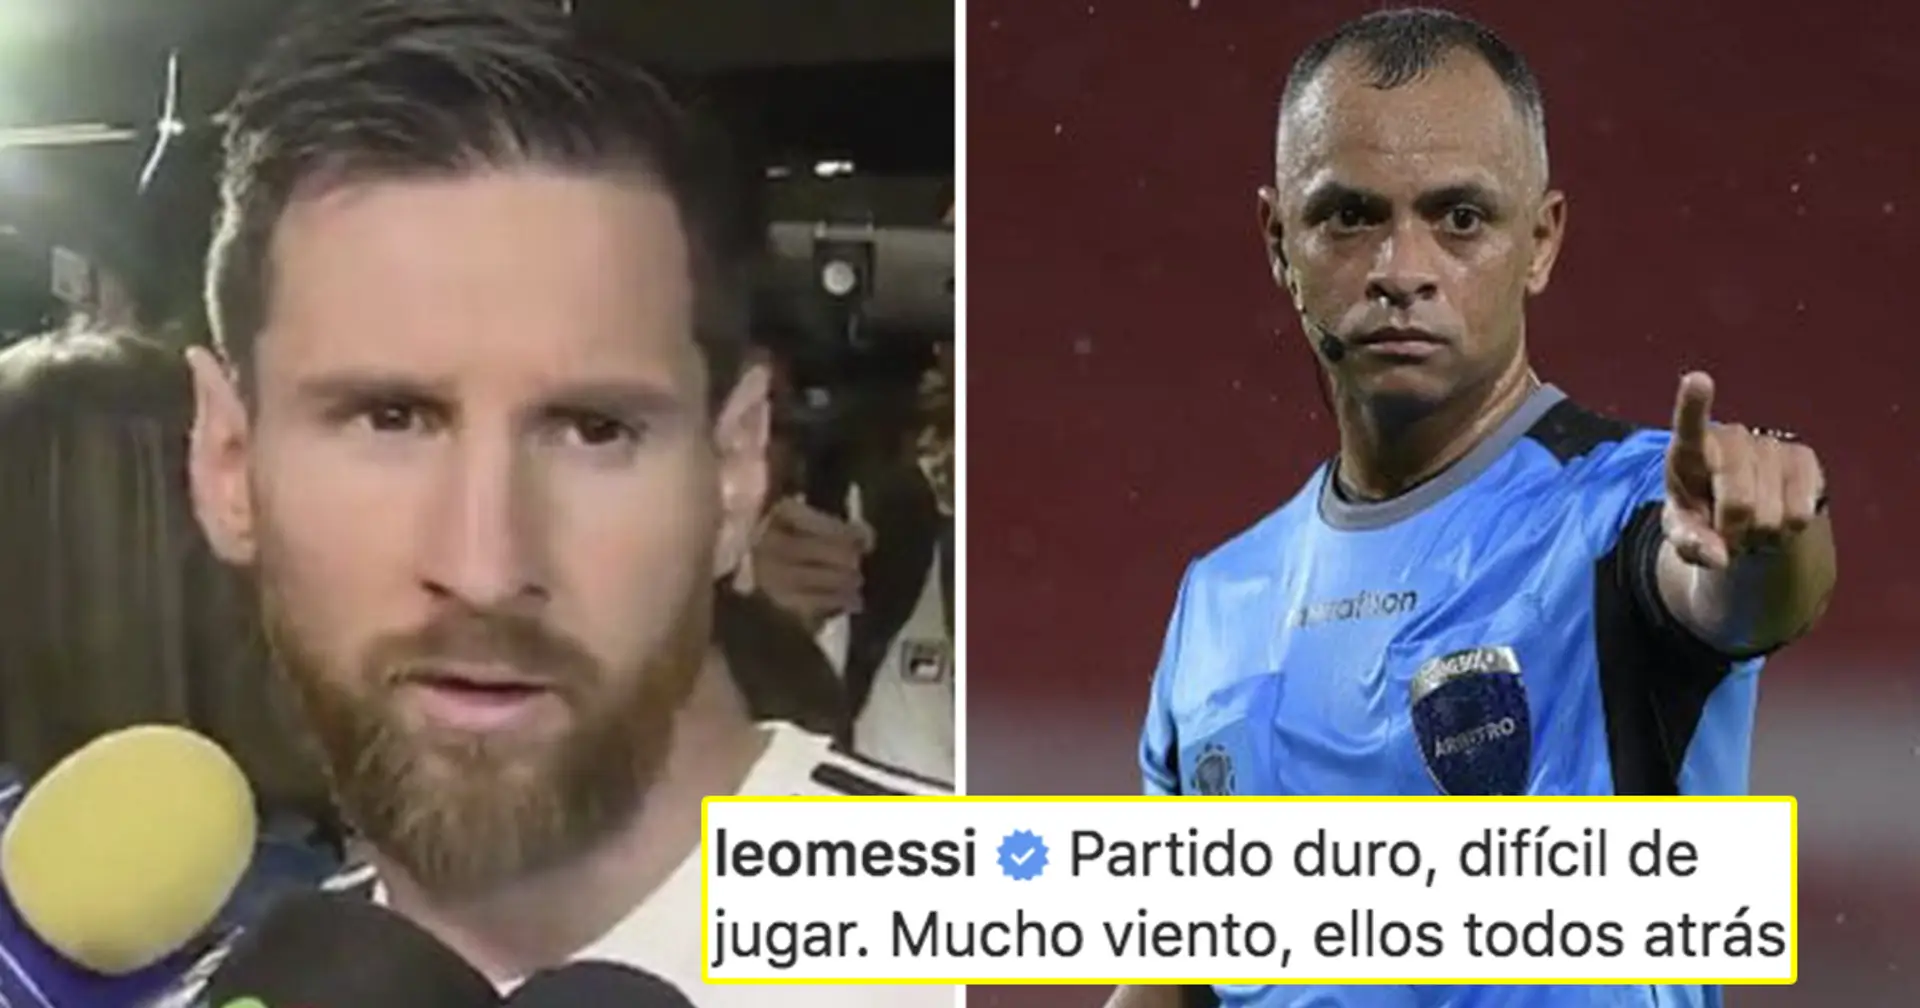 'Seems like he does it on purpose': Messi slams Argentina-Peru referee right in Instagram post